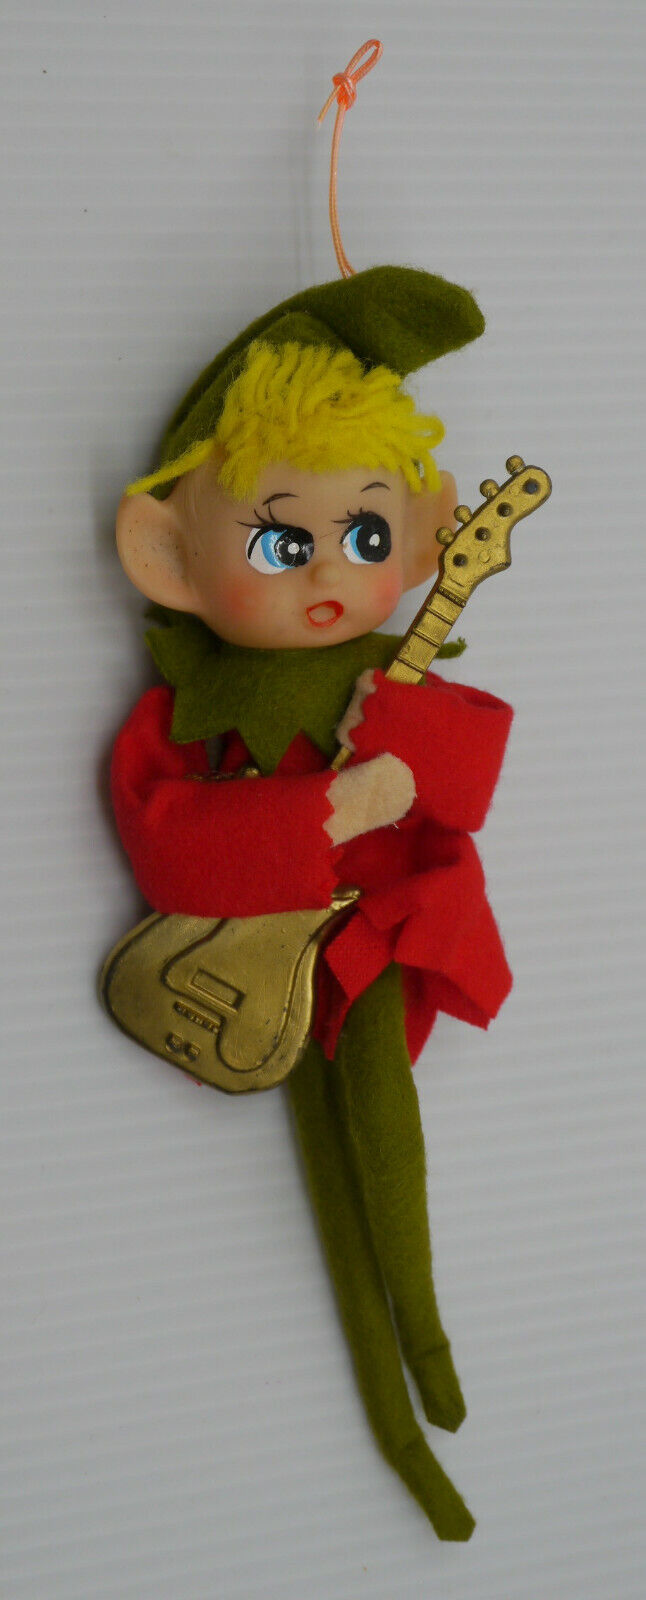 VINTAGE ELF, PIXIE WITH GUITAR CHRISTMAS ORNAMENT, FELT CLOTHING, MADE IN JAPAN